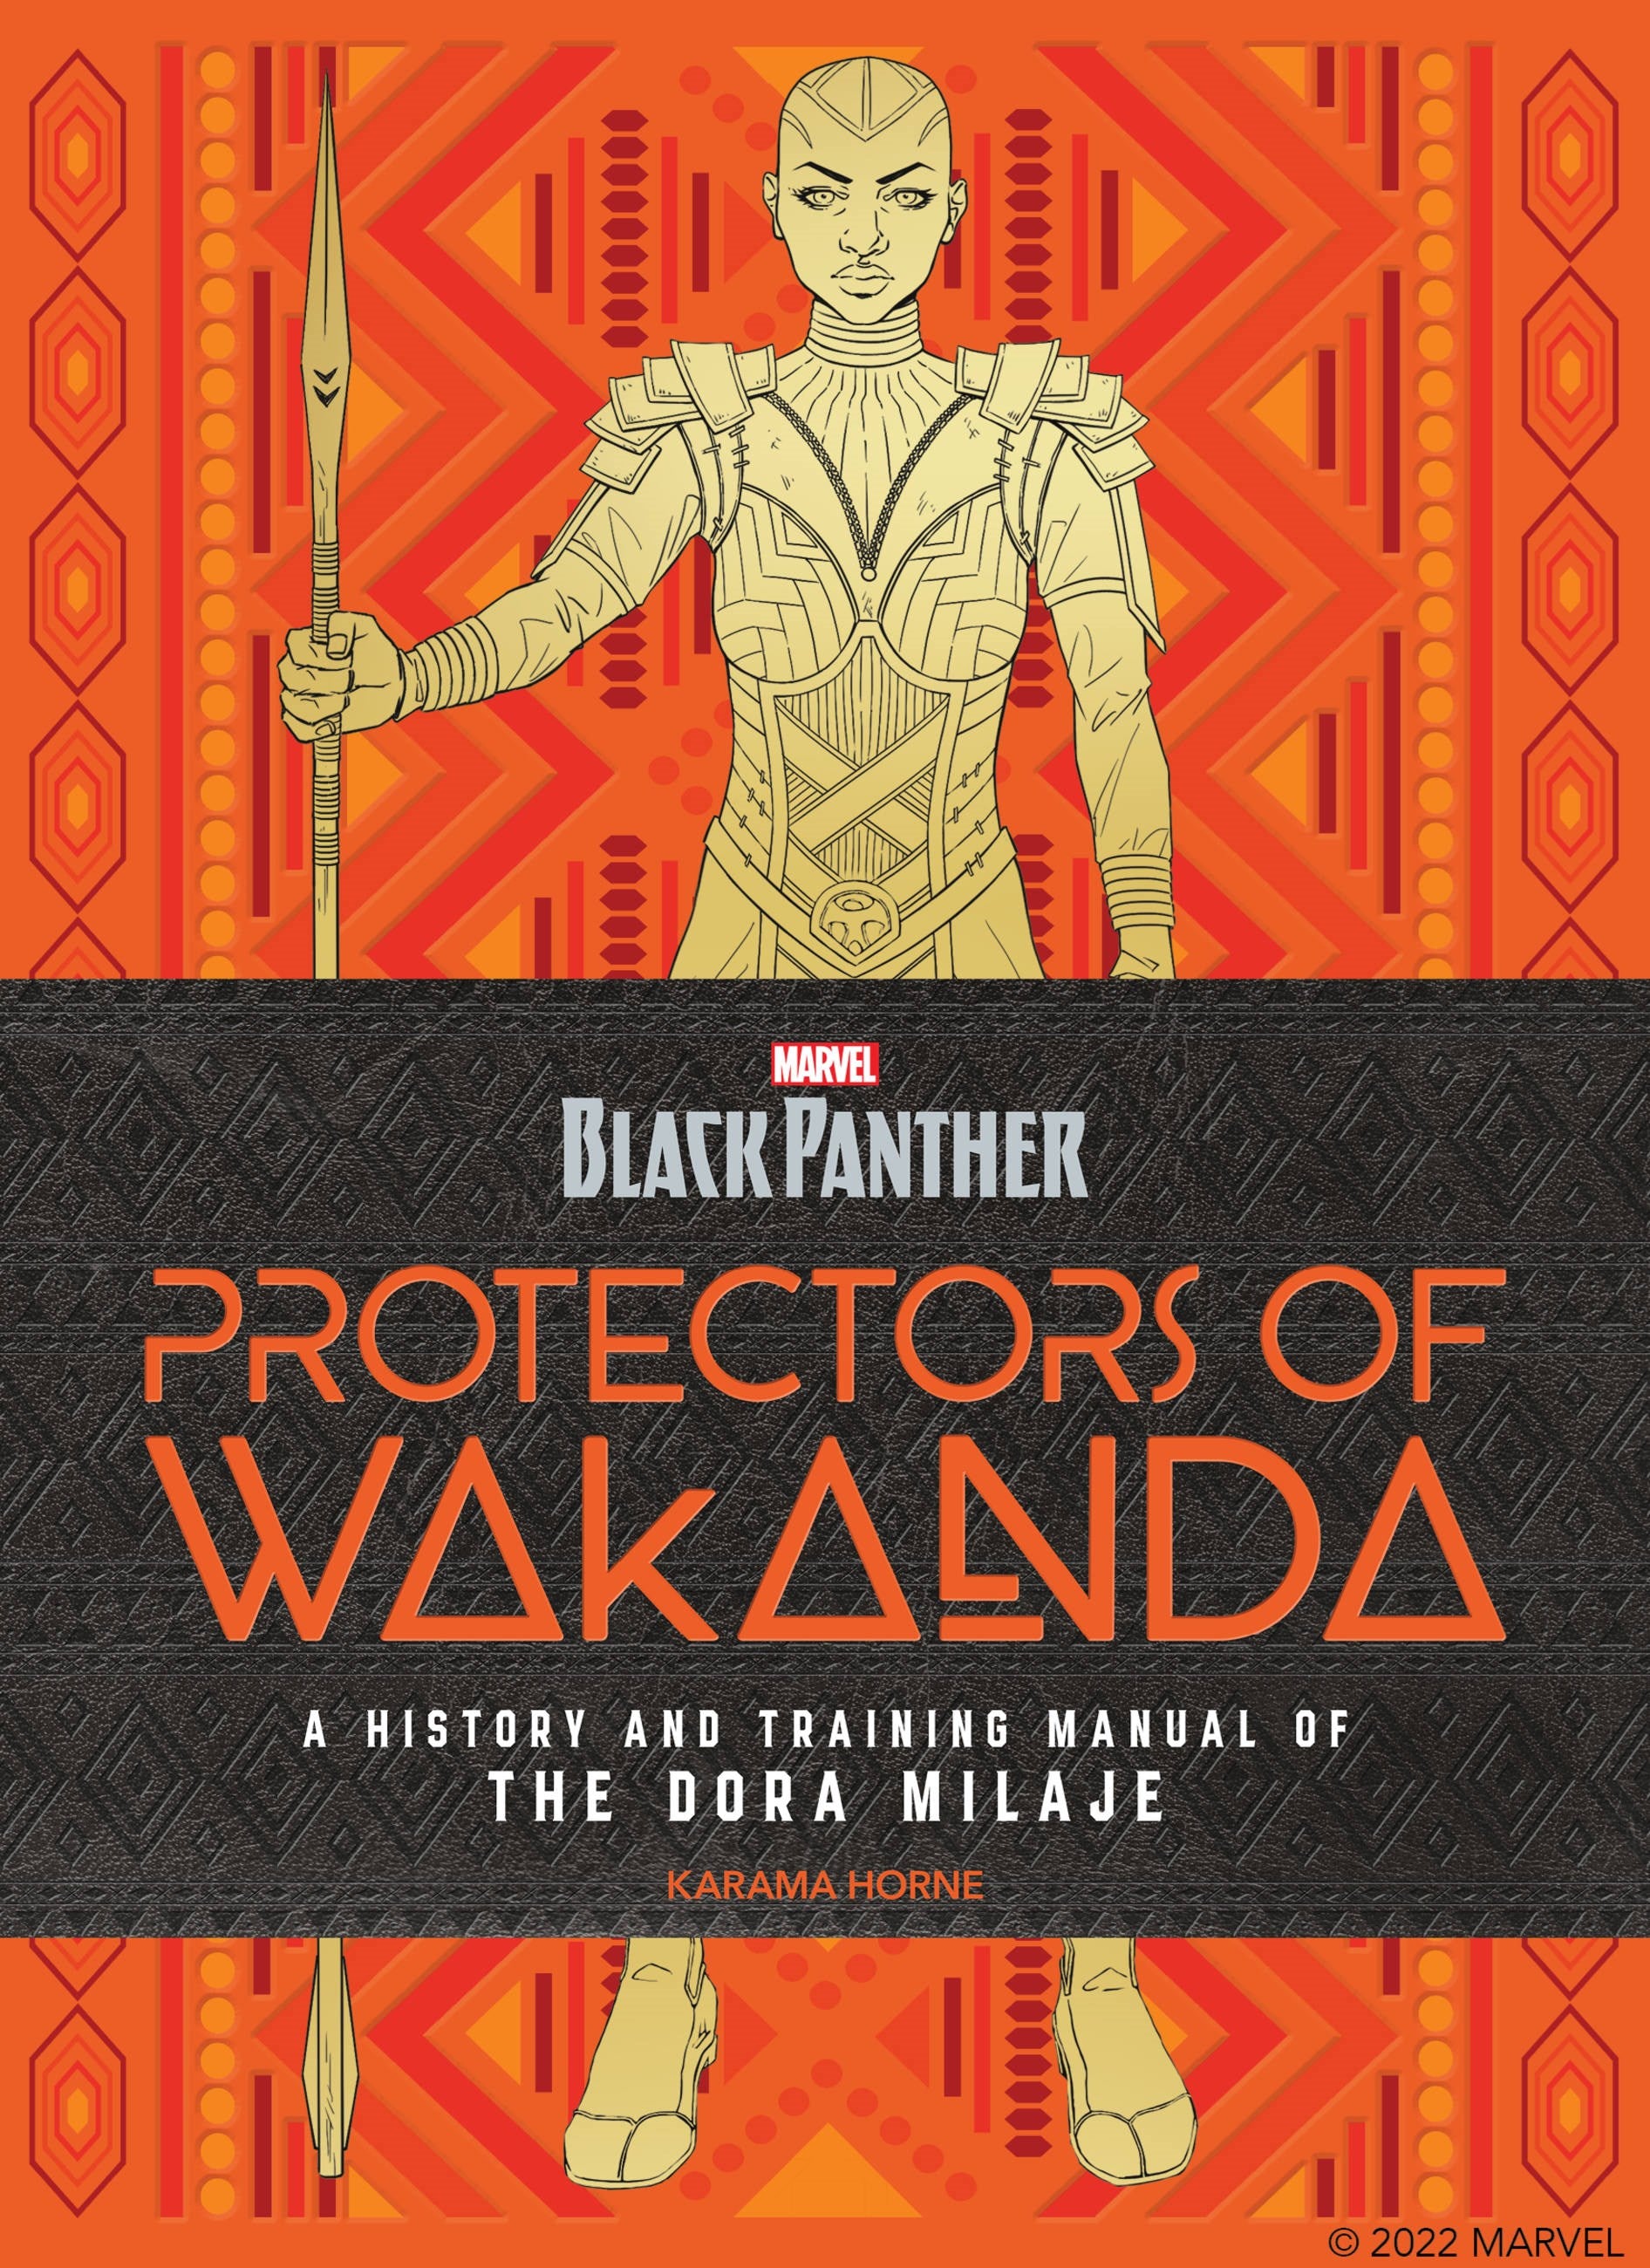 Black Panther: Protectors of Wakanda : A History and Training Manual of the Dora Milaje from the Marvel Universe